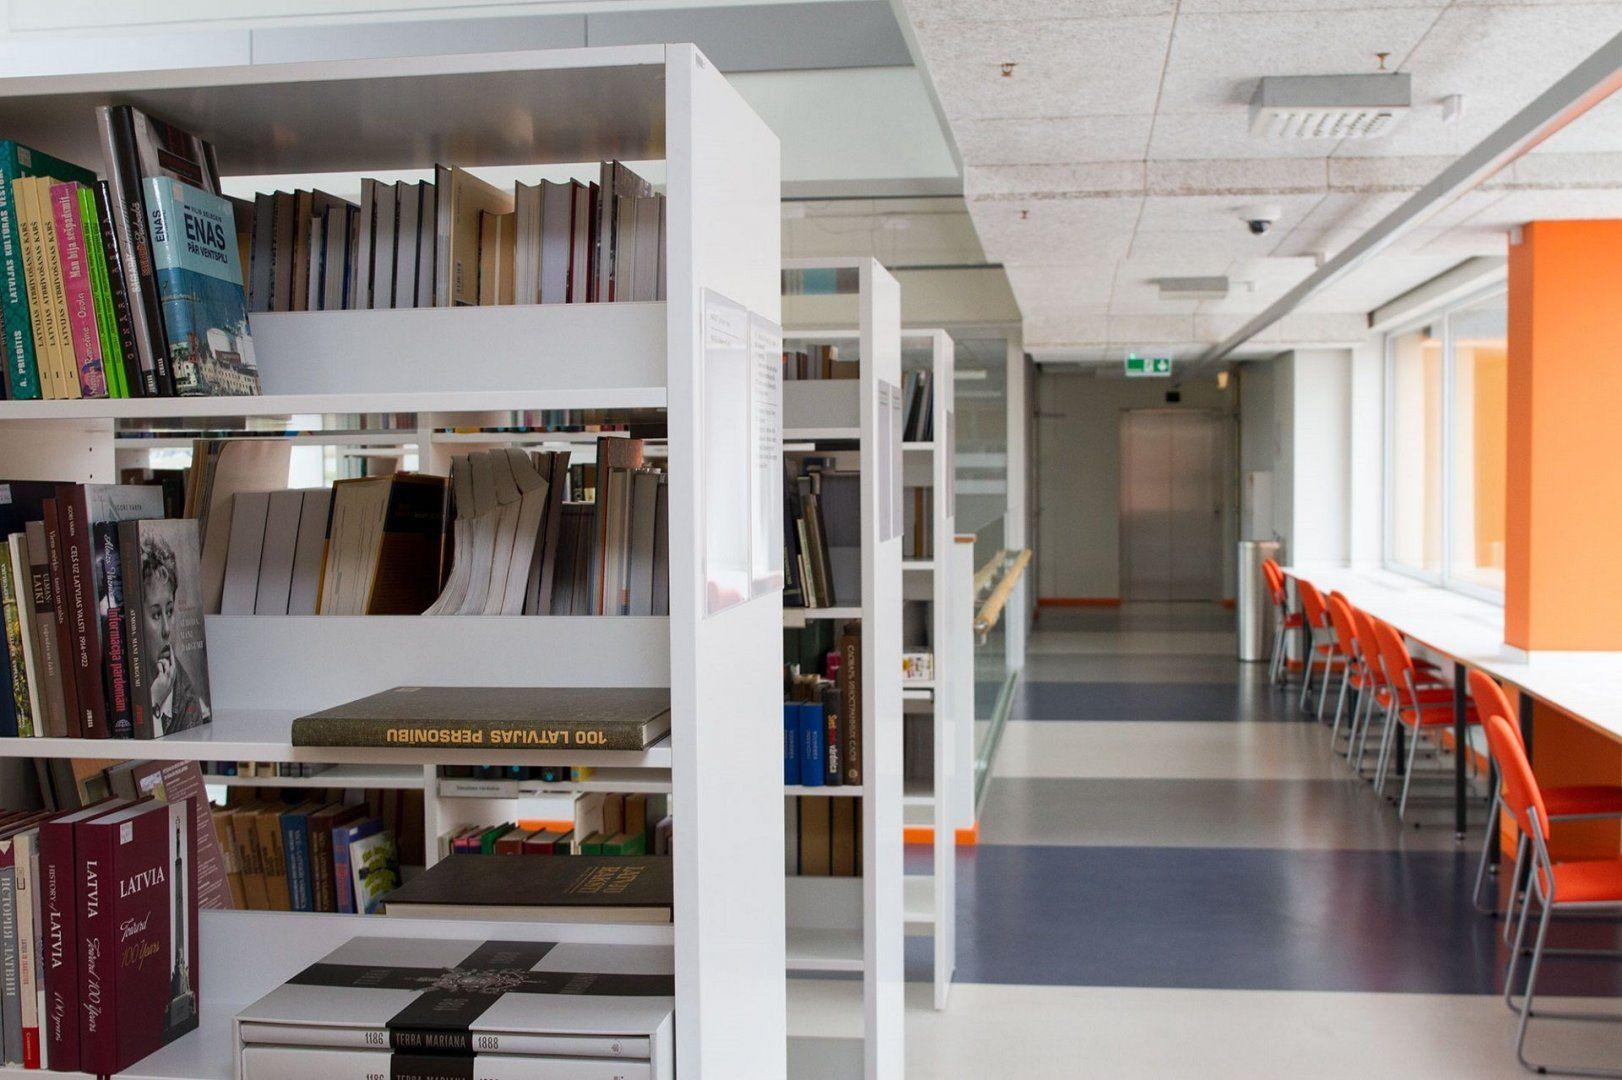 RTU Scientific library will open its doors to readers at the beginning of the academic year